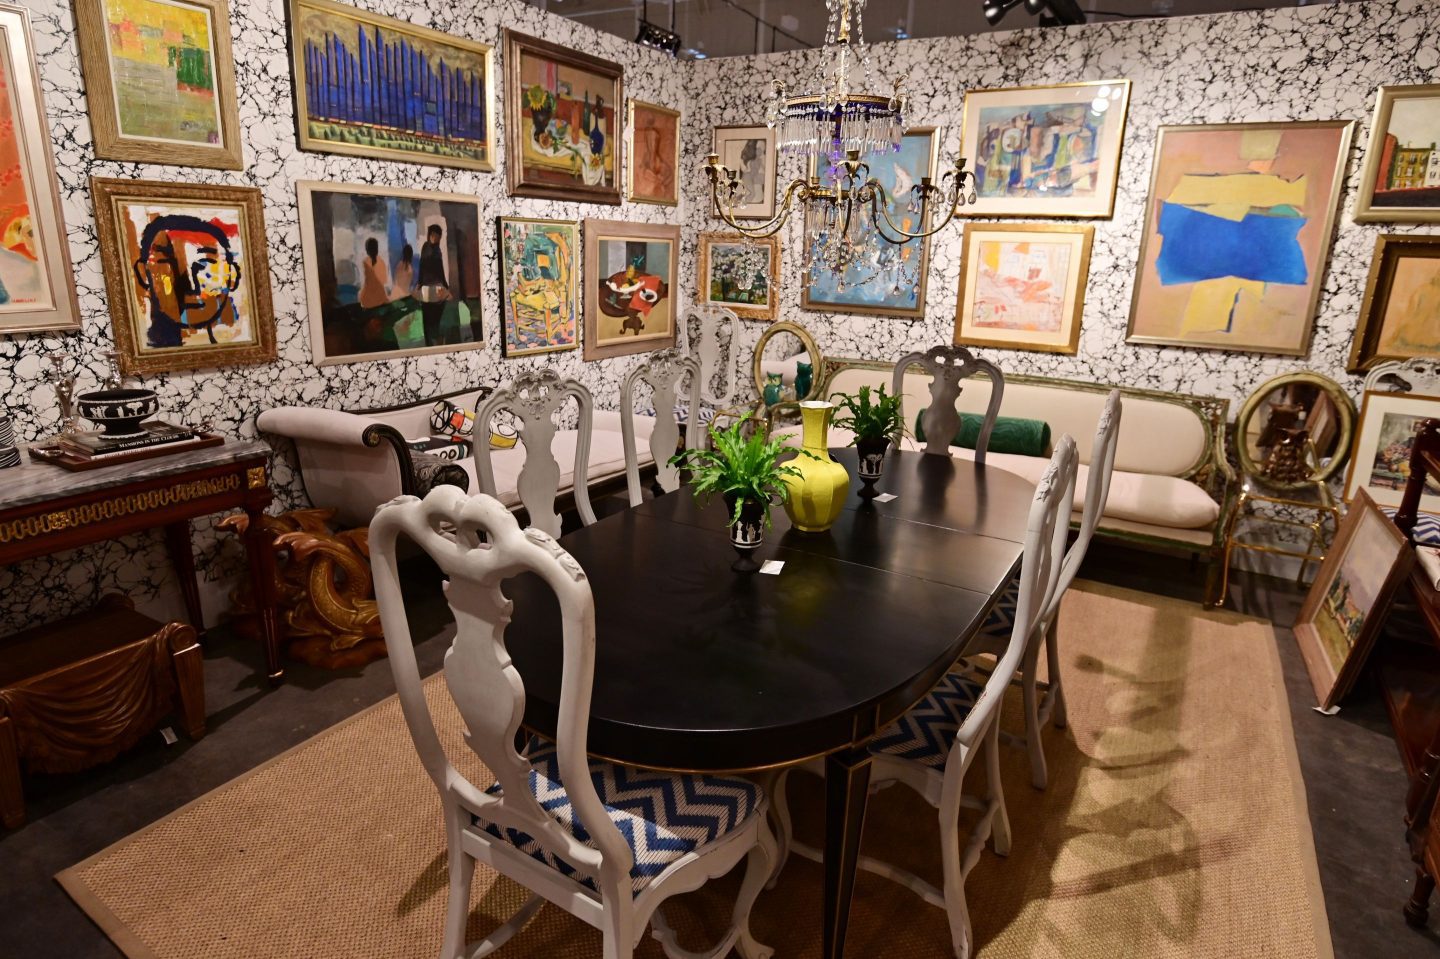 Southern Exposure with Black Southern Belle: Nashville Antiques & Garden Show